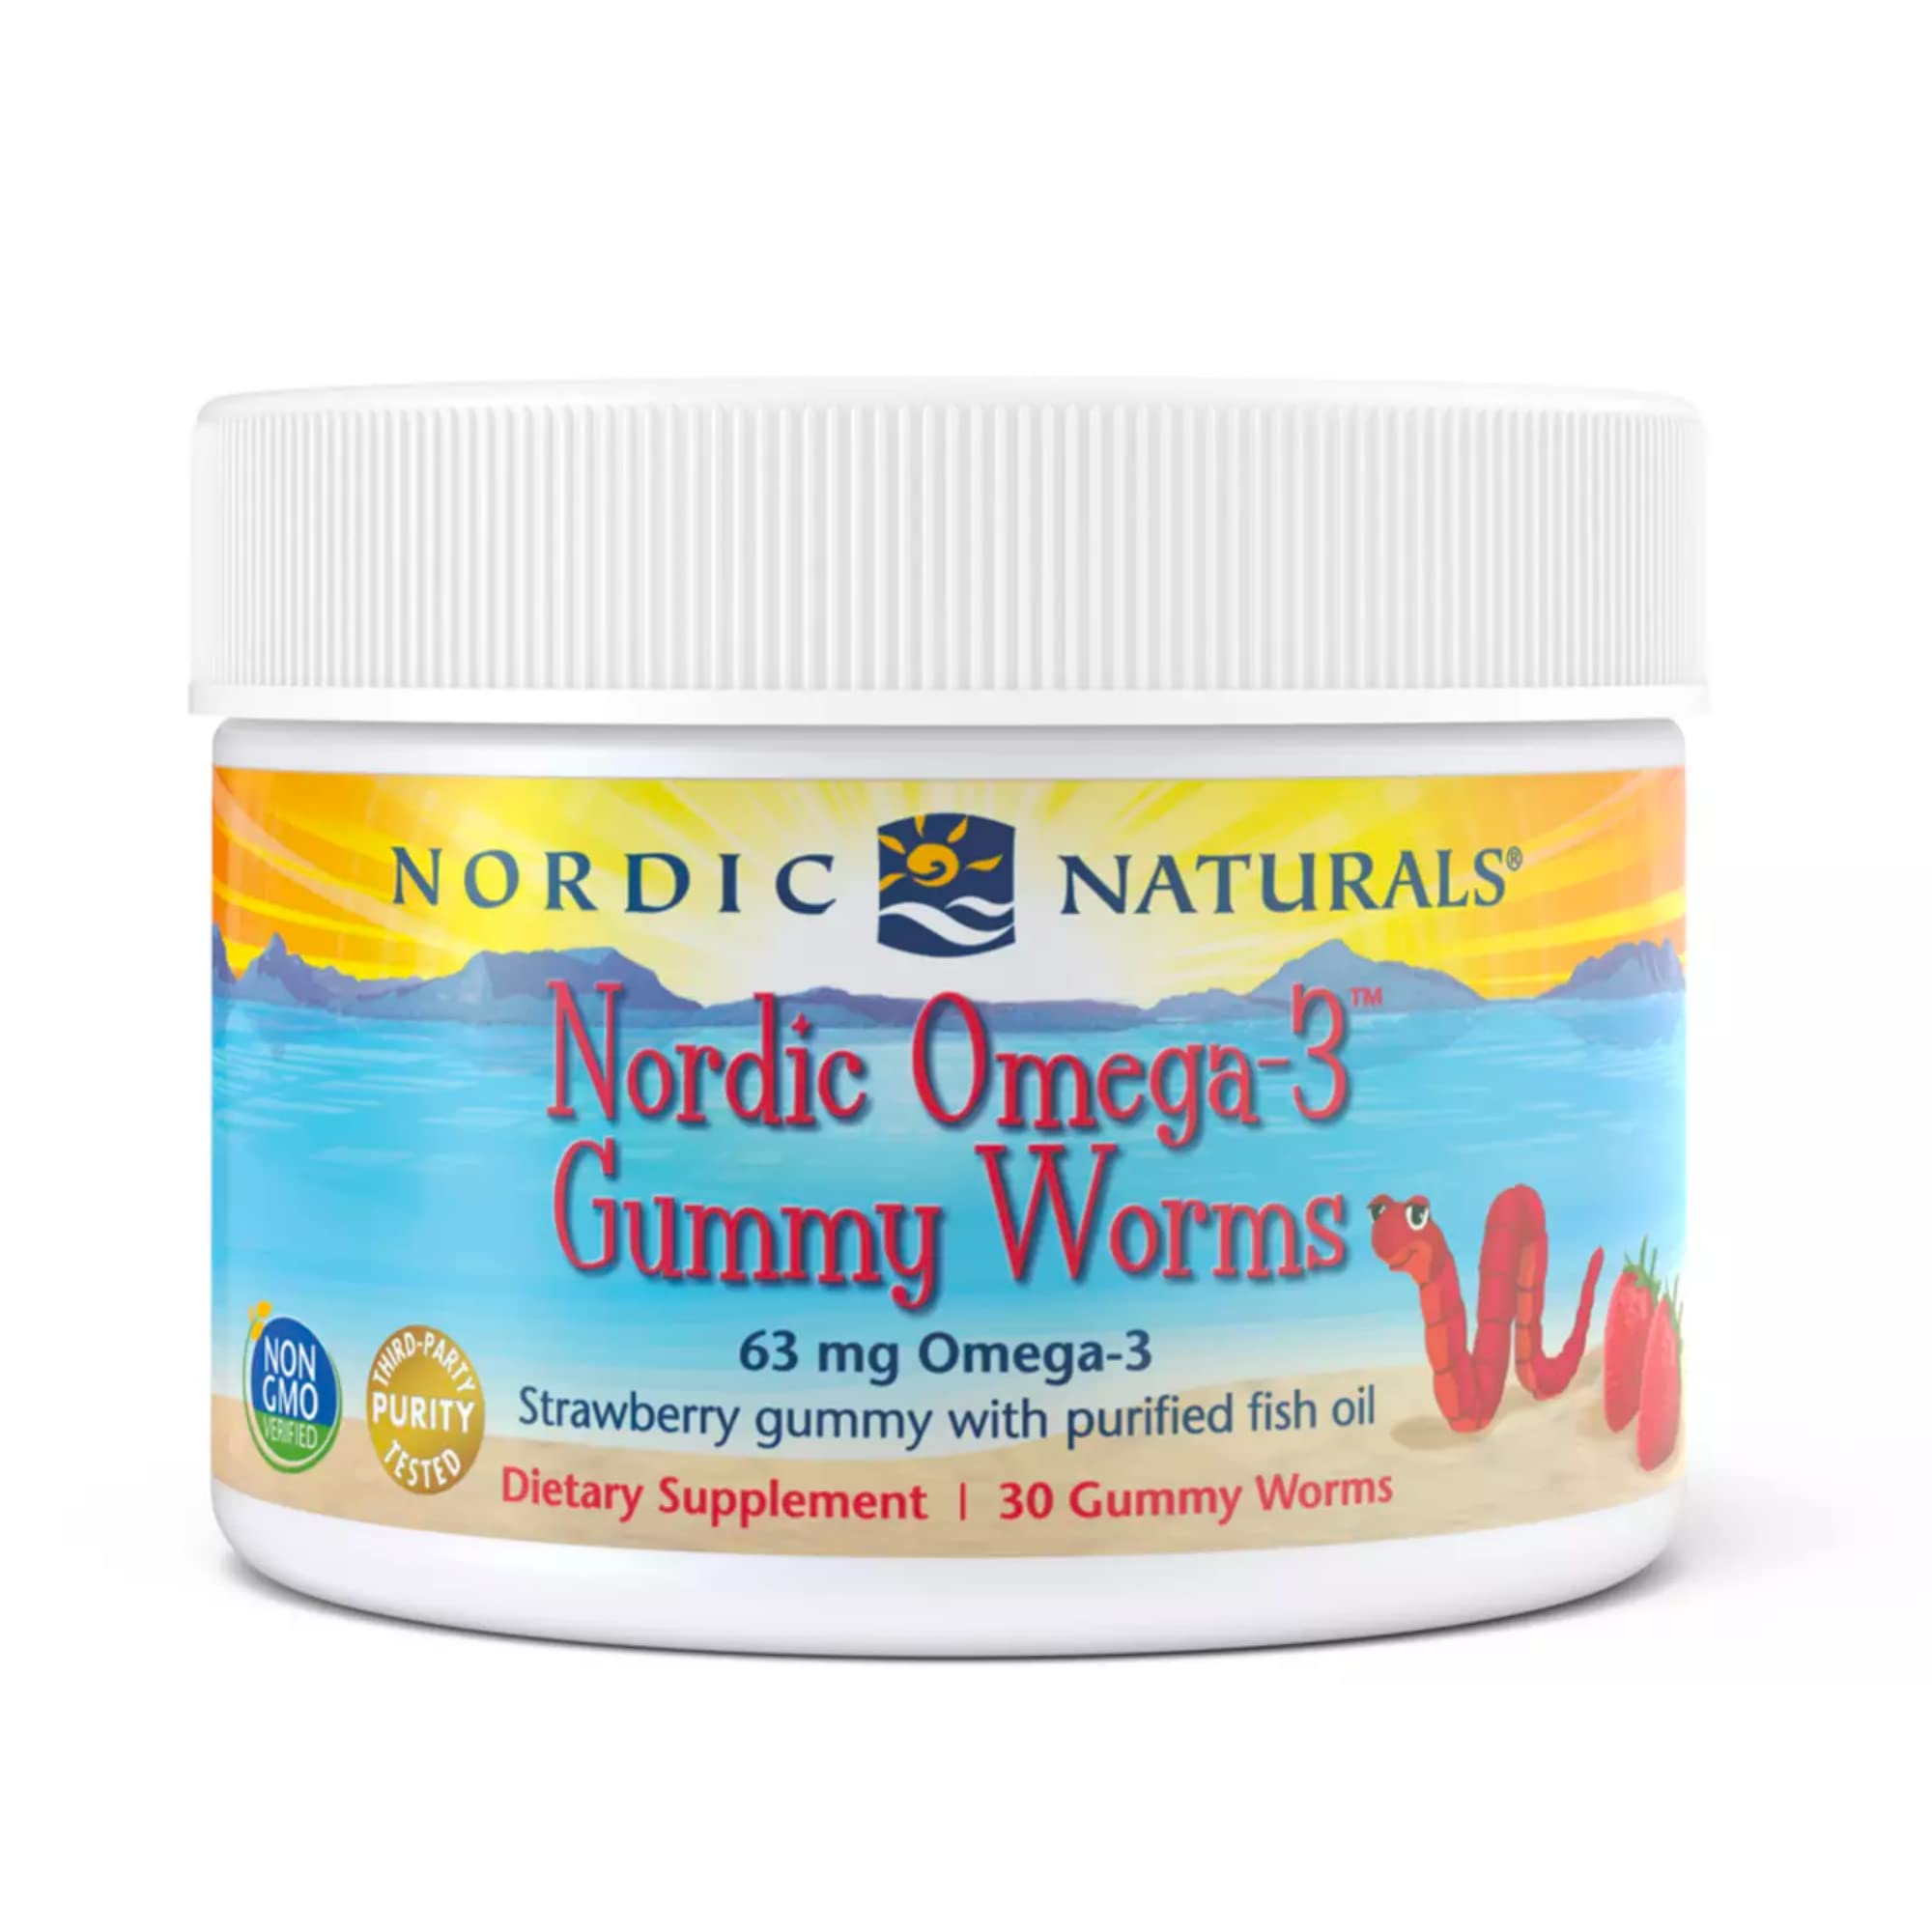 Nordic Naturals - Nordic Omega-3 Gummy Worms, Supports Optimal Brain and Immune Function, 30 Count